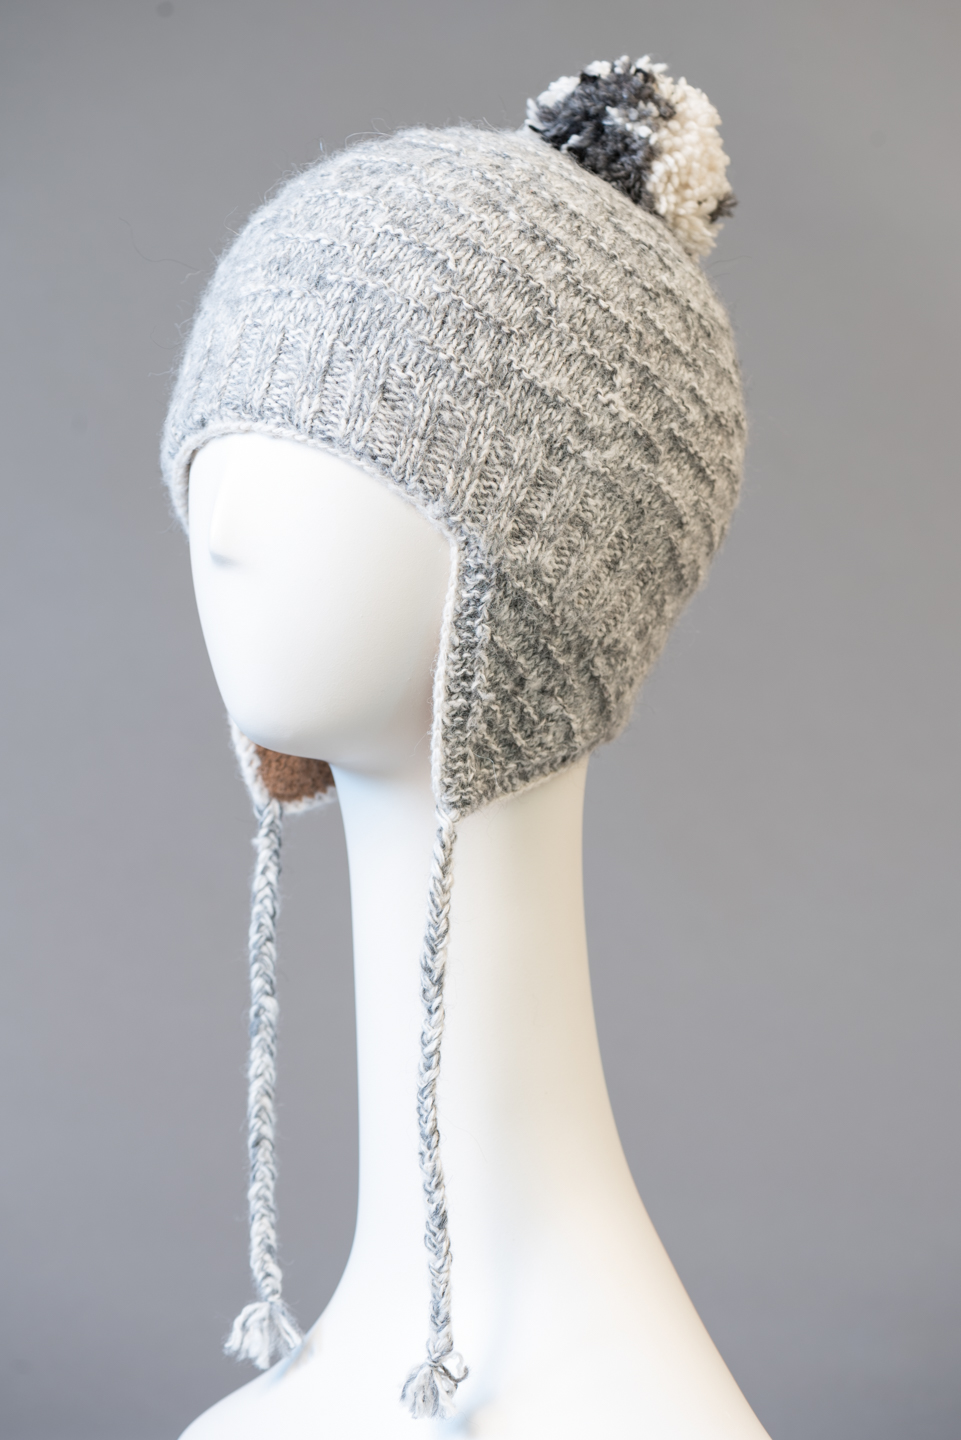 tuque andine avec pompon amovible / andean hat with removable pompom